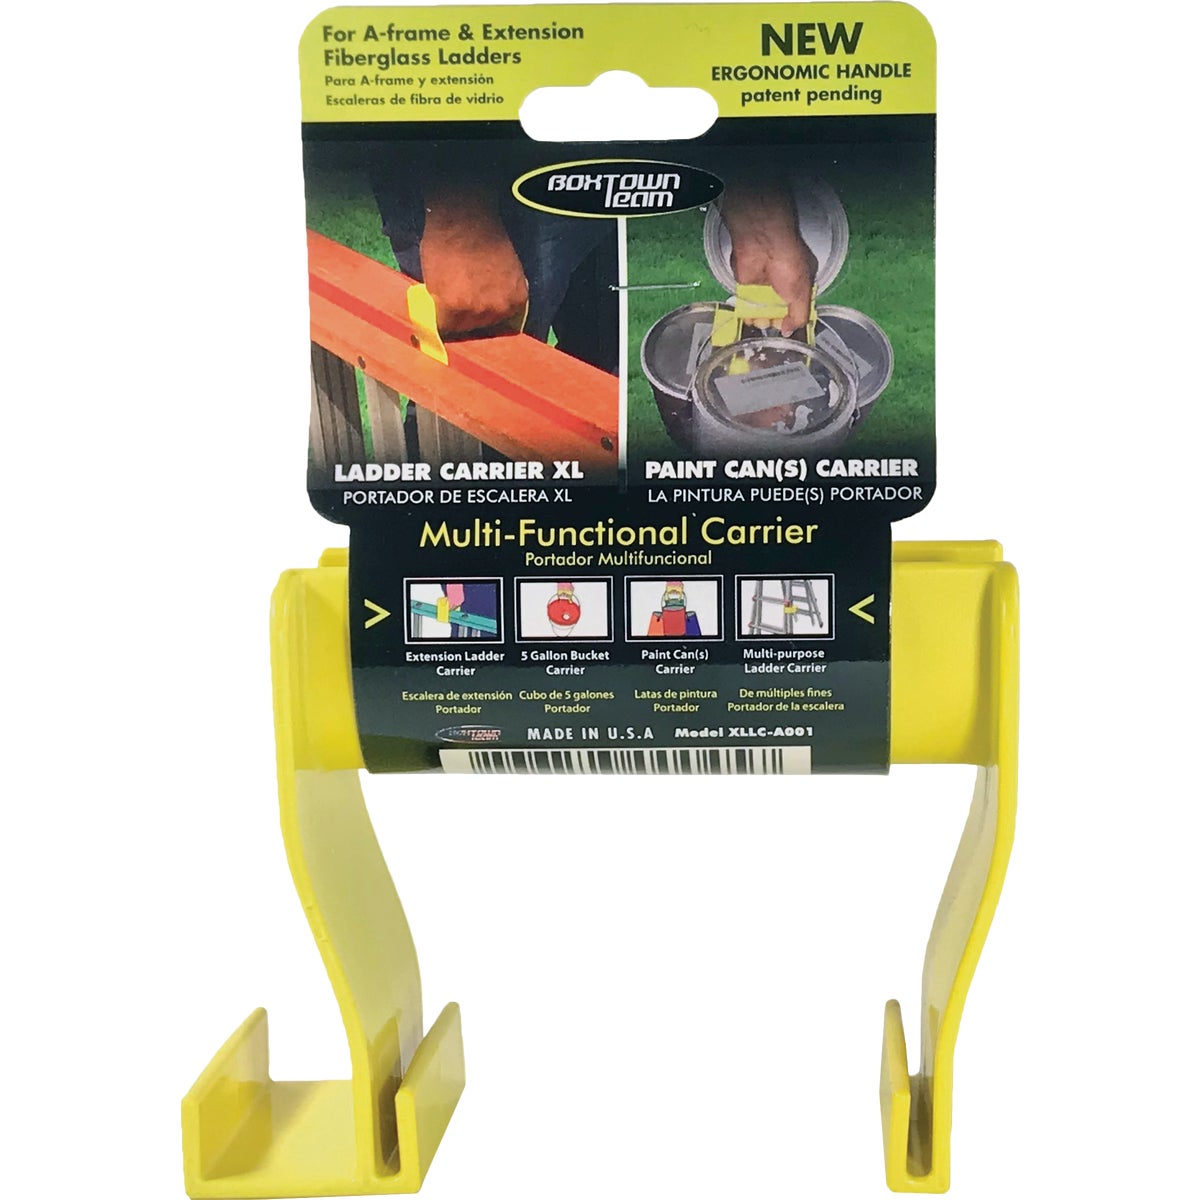 Item 799032, Ladder carrier is ergonomically designed for larger hand sizes to carry 